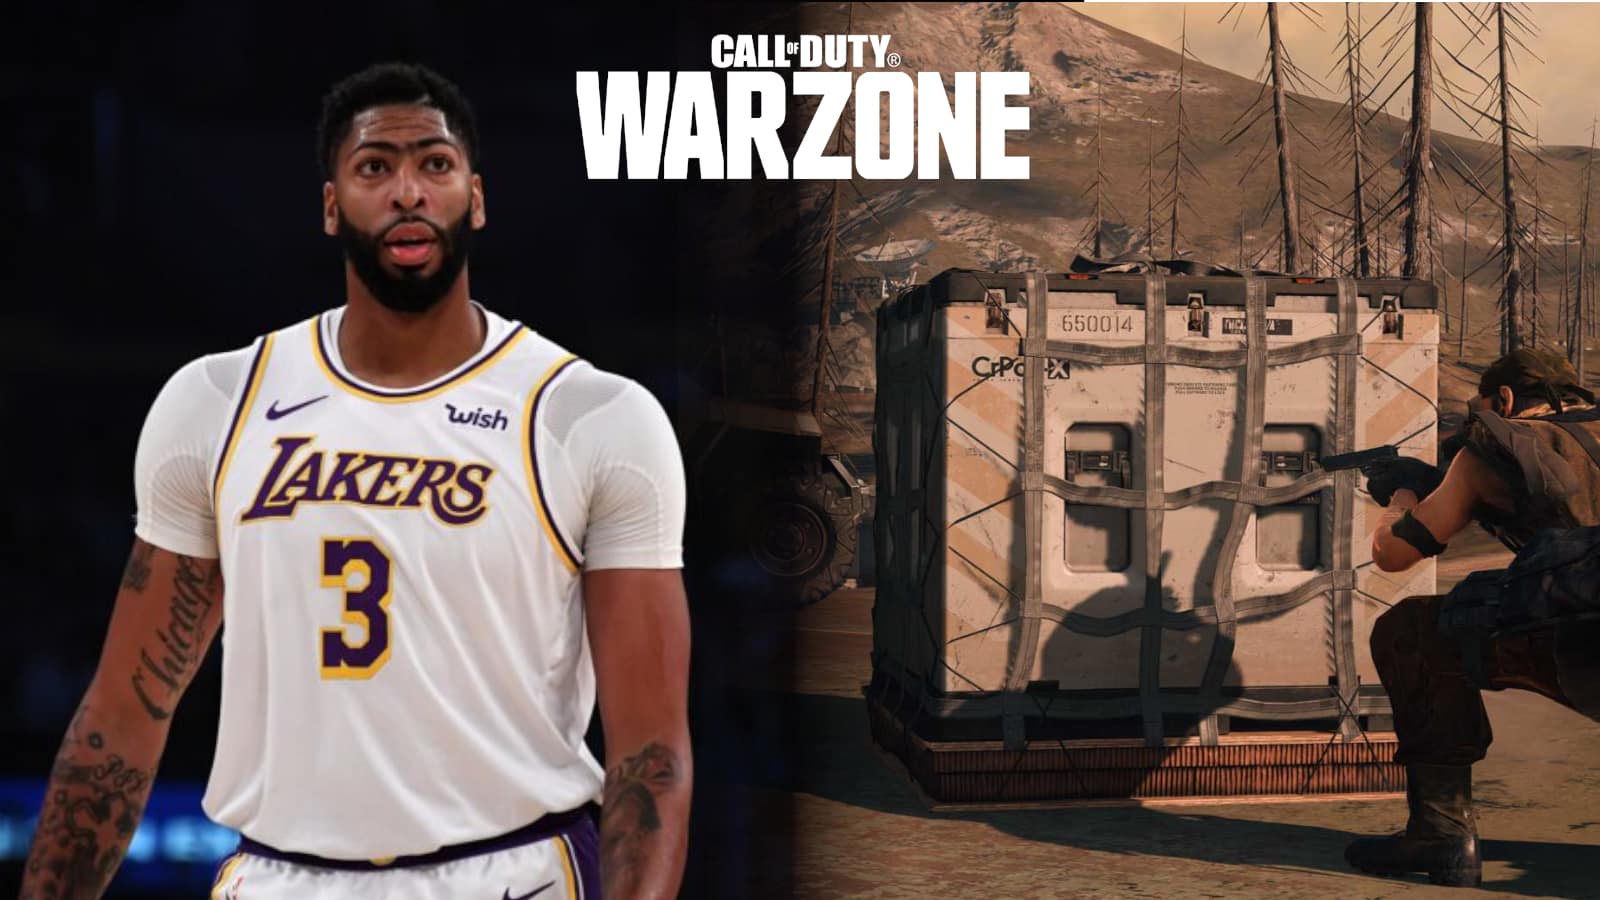 Loadouts can be a huge part of success in Warzone but with the new drop change in the Pacific update, even people like NBA star Anthony Davis are upset and want it changed. In the December 8 Warzone update, loadout drops received massive updates. They can now only be purchased after the first circle closes. This means it takes much longer to get set up on Caldera and players need to rely on ground loot. Many people including Dr Disrespect, JGOD, and others have voiced their opinion on this change and how it’s bad for the game, but now NBA Champion, Anthony Davis is joining the fight as well. NBA Lakers player Anthony Davis wants Warzone loadout drops reverted When Anthony Davis isn’t tearing up the court in the NBA, he finds himself dropping into the battlefield of Warzone. With the Pacific update, some stuff has changed since the last time Davis loaded the game but that didn’t stop the superstar from noticing a new mechanic that he’s not a fan of. While he may not be able to stay on top of all the updates Raven Software releases, the NBA player messaged Swagg to ask why he couldn’t get a loadout on the new map. Swagg told him that it’s still purchasable but not until the first circle closes, to which Davis replied “That’s wack.” This change makes it so Warzone players need to survive a full circle worth of gas before getting their hands on a loadout. He isn’t the first to voice his disapproval of the loadout drop change as many Warzone fans have been vocal about their frustration with this update. Players feel that it is ruining the pace of the game and is causing others to camp until they are able to purchase one. While it is unknown if Raven will ever revert this, it is clear that even the most casual of gamers are not happy with this loadout drop system.